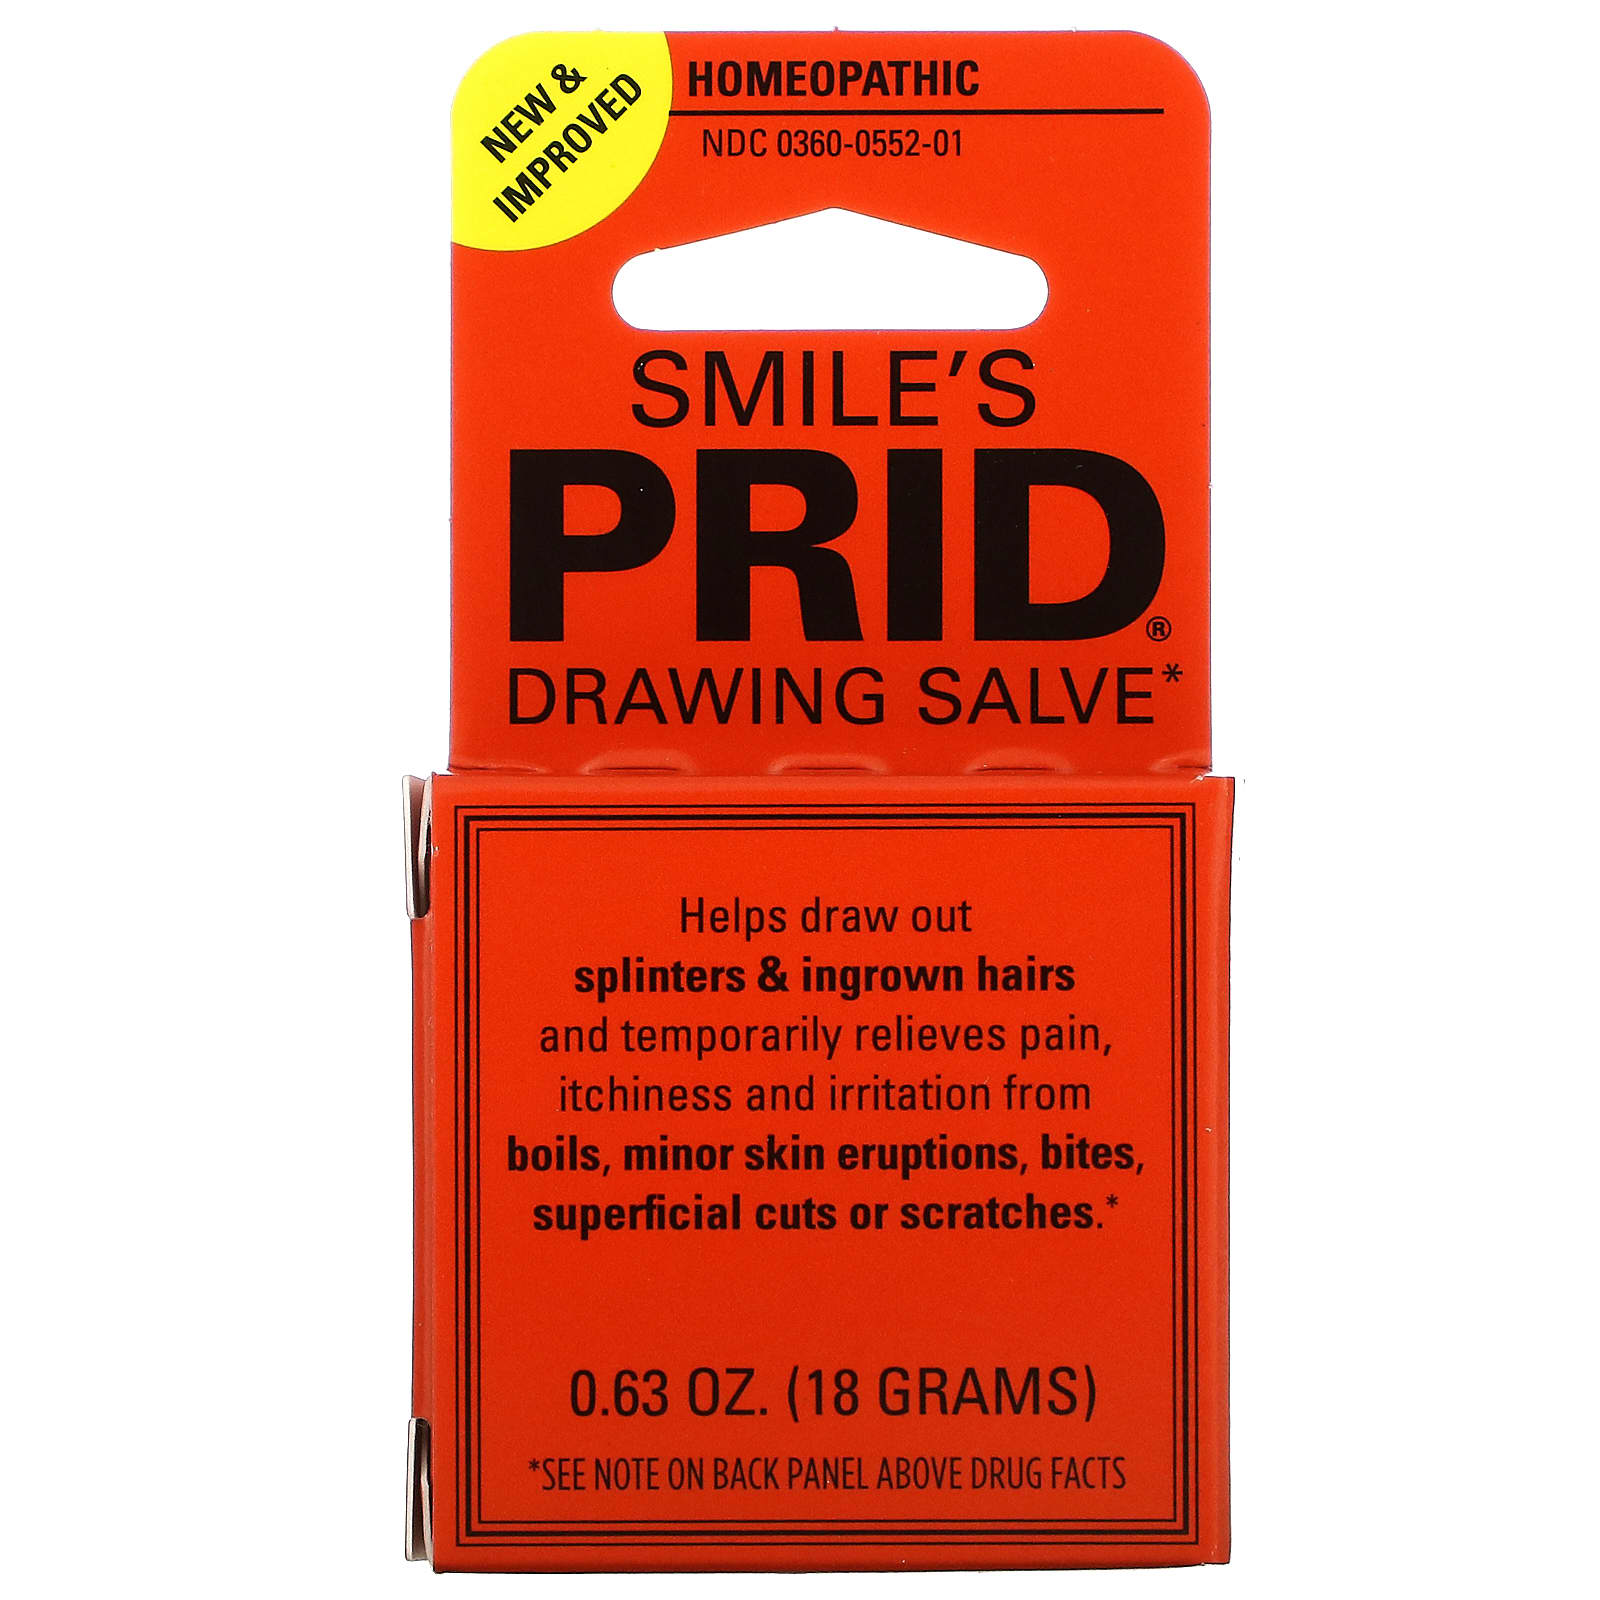 Smile's PRID Drawing Salve by Hyland's Relief of Topical Pain and Skin Eruptions 